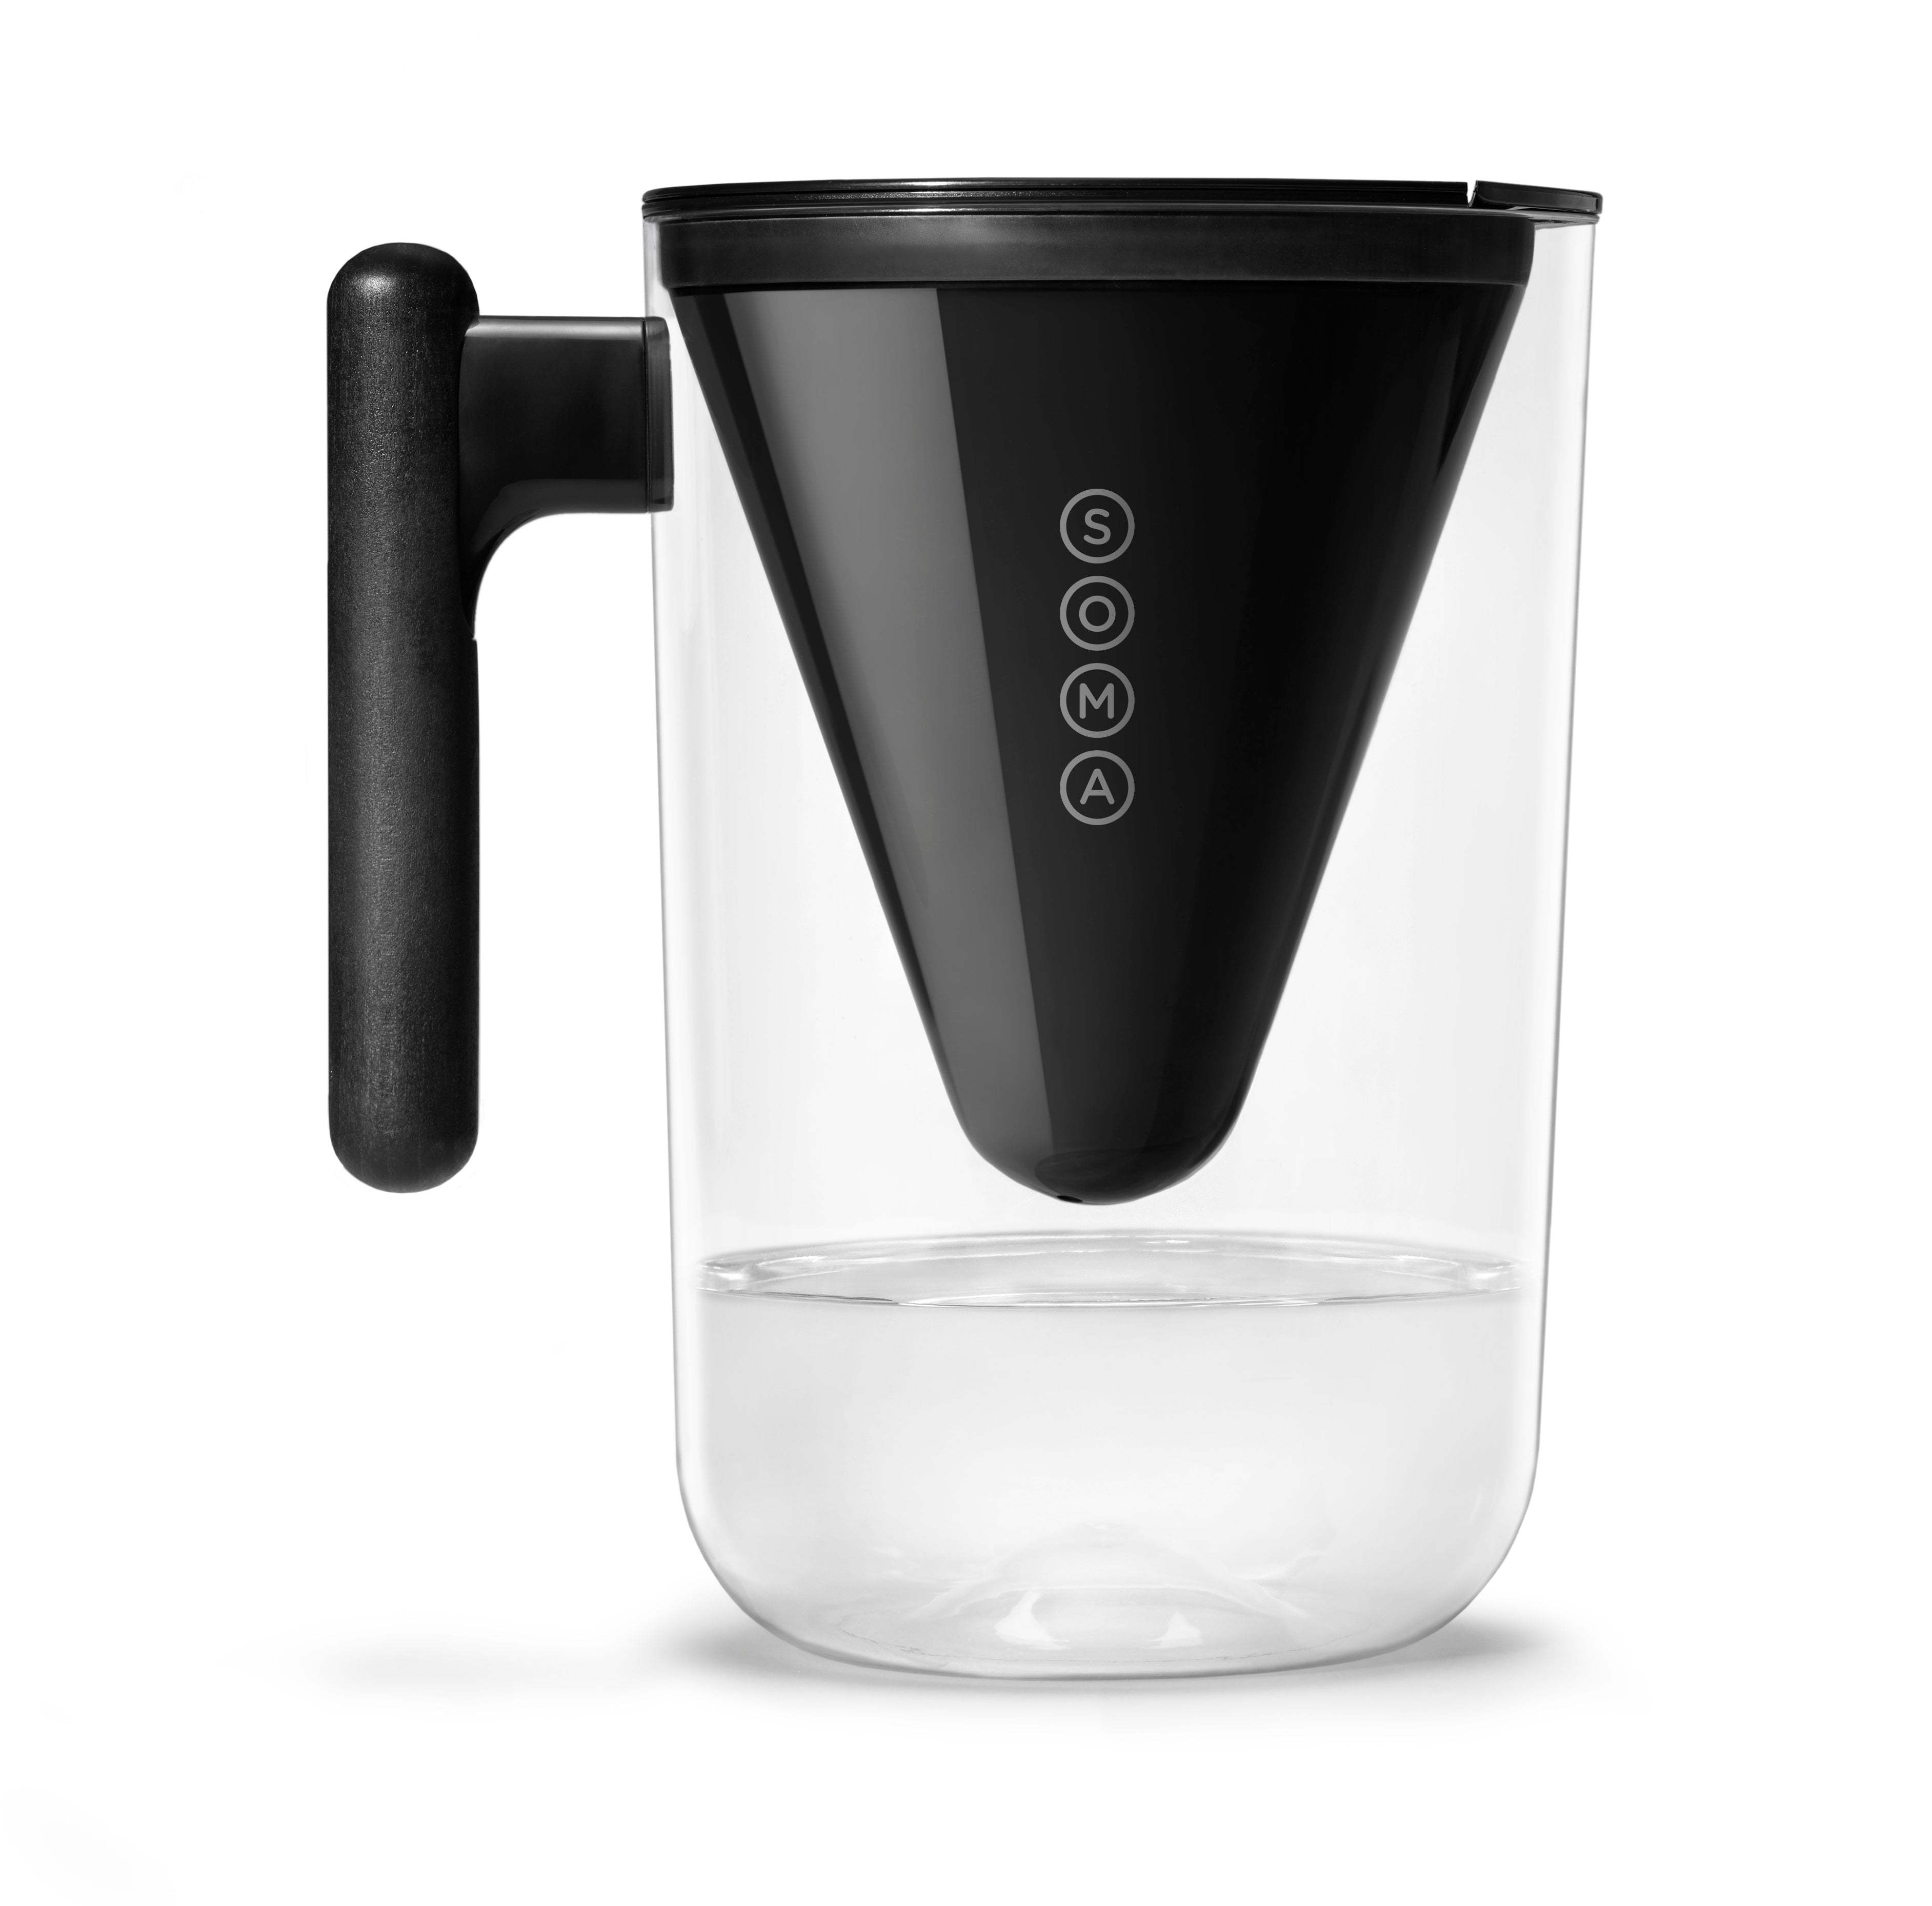 10-Cup Filtered Pitcher & Filters Kit